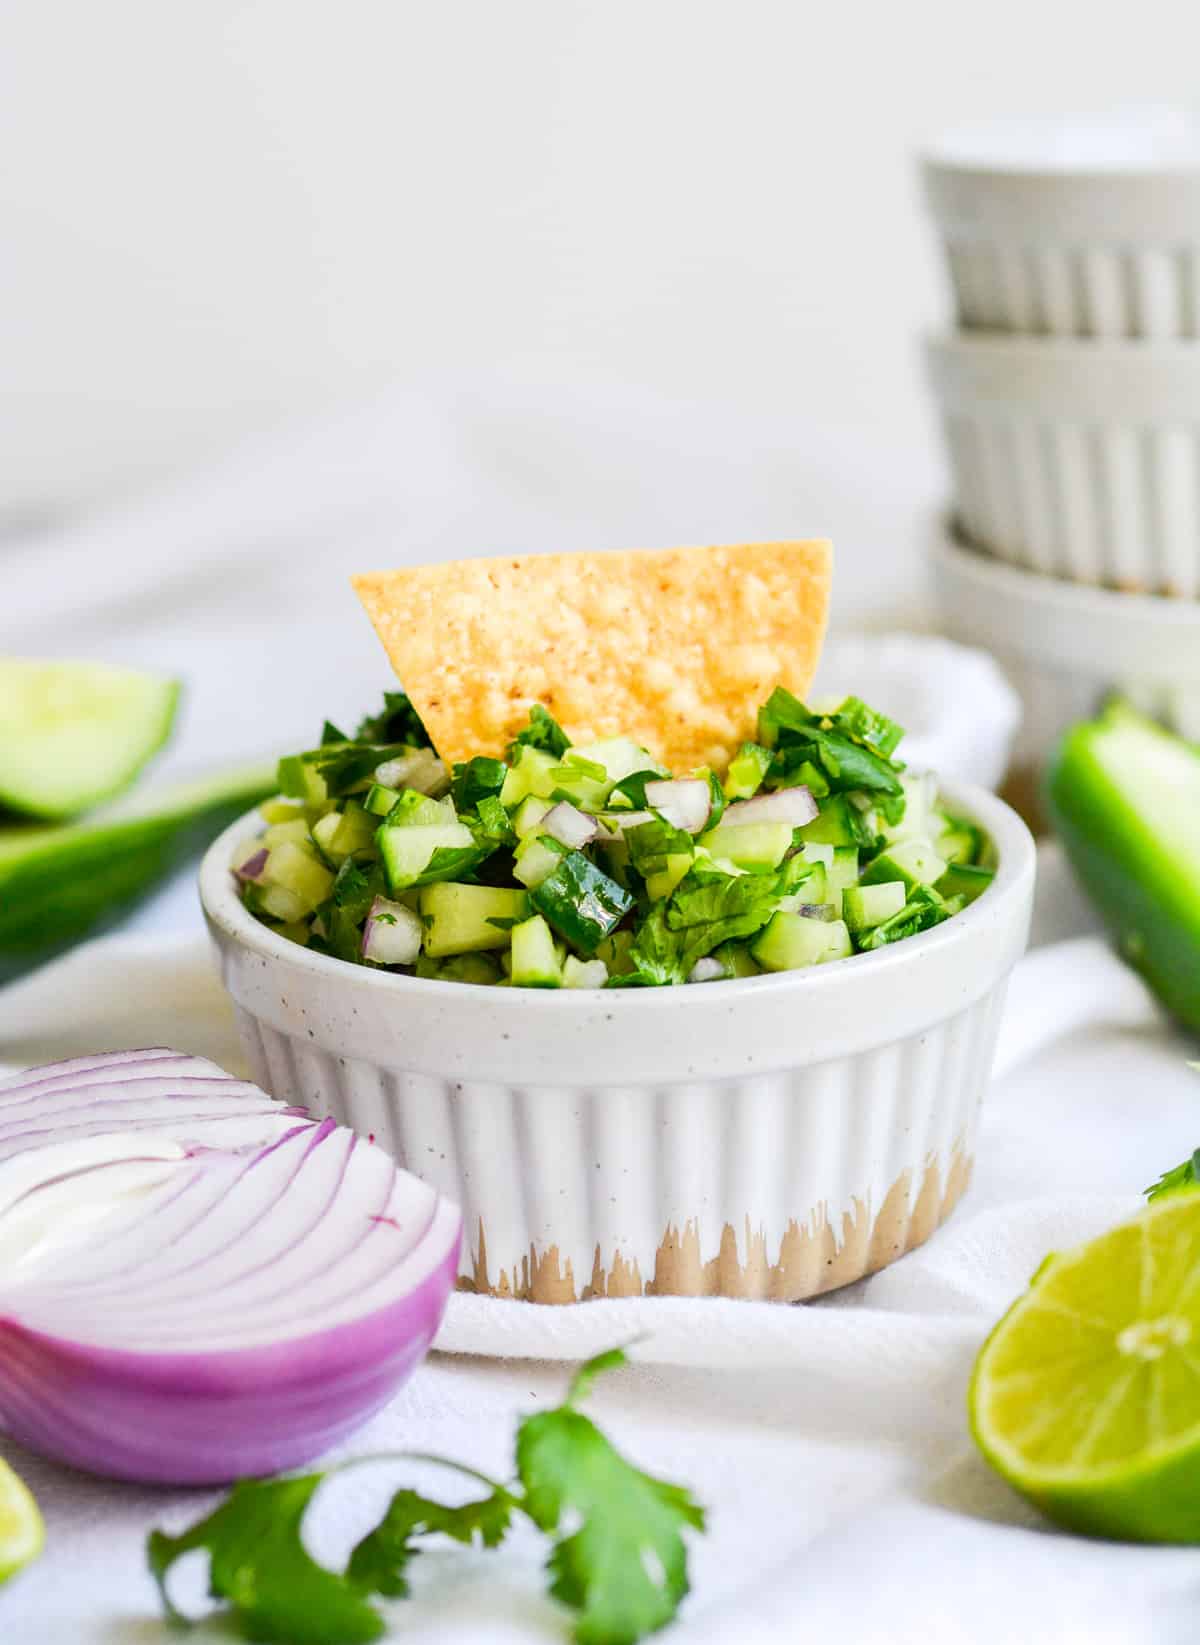 Cucumber pico de gallo in a ramekin with a tortilla chip sticking out of it